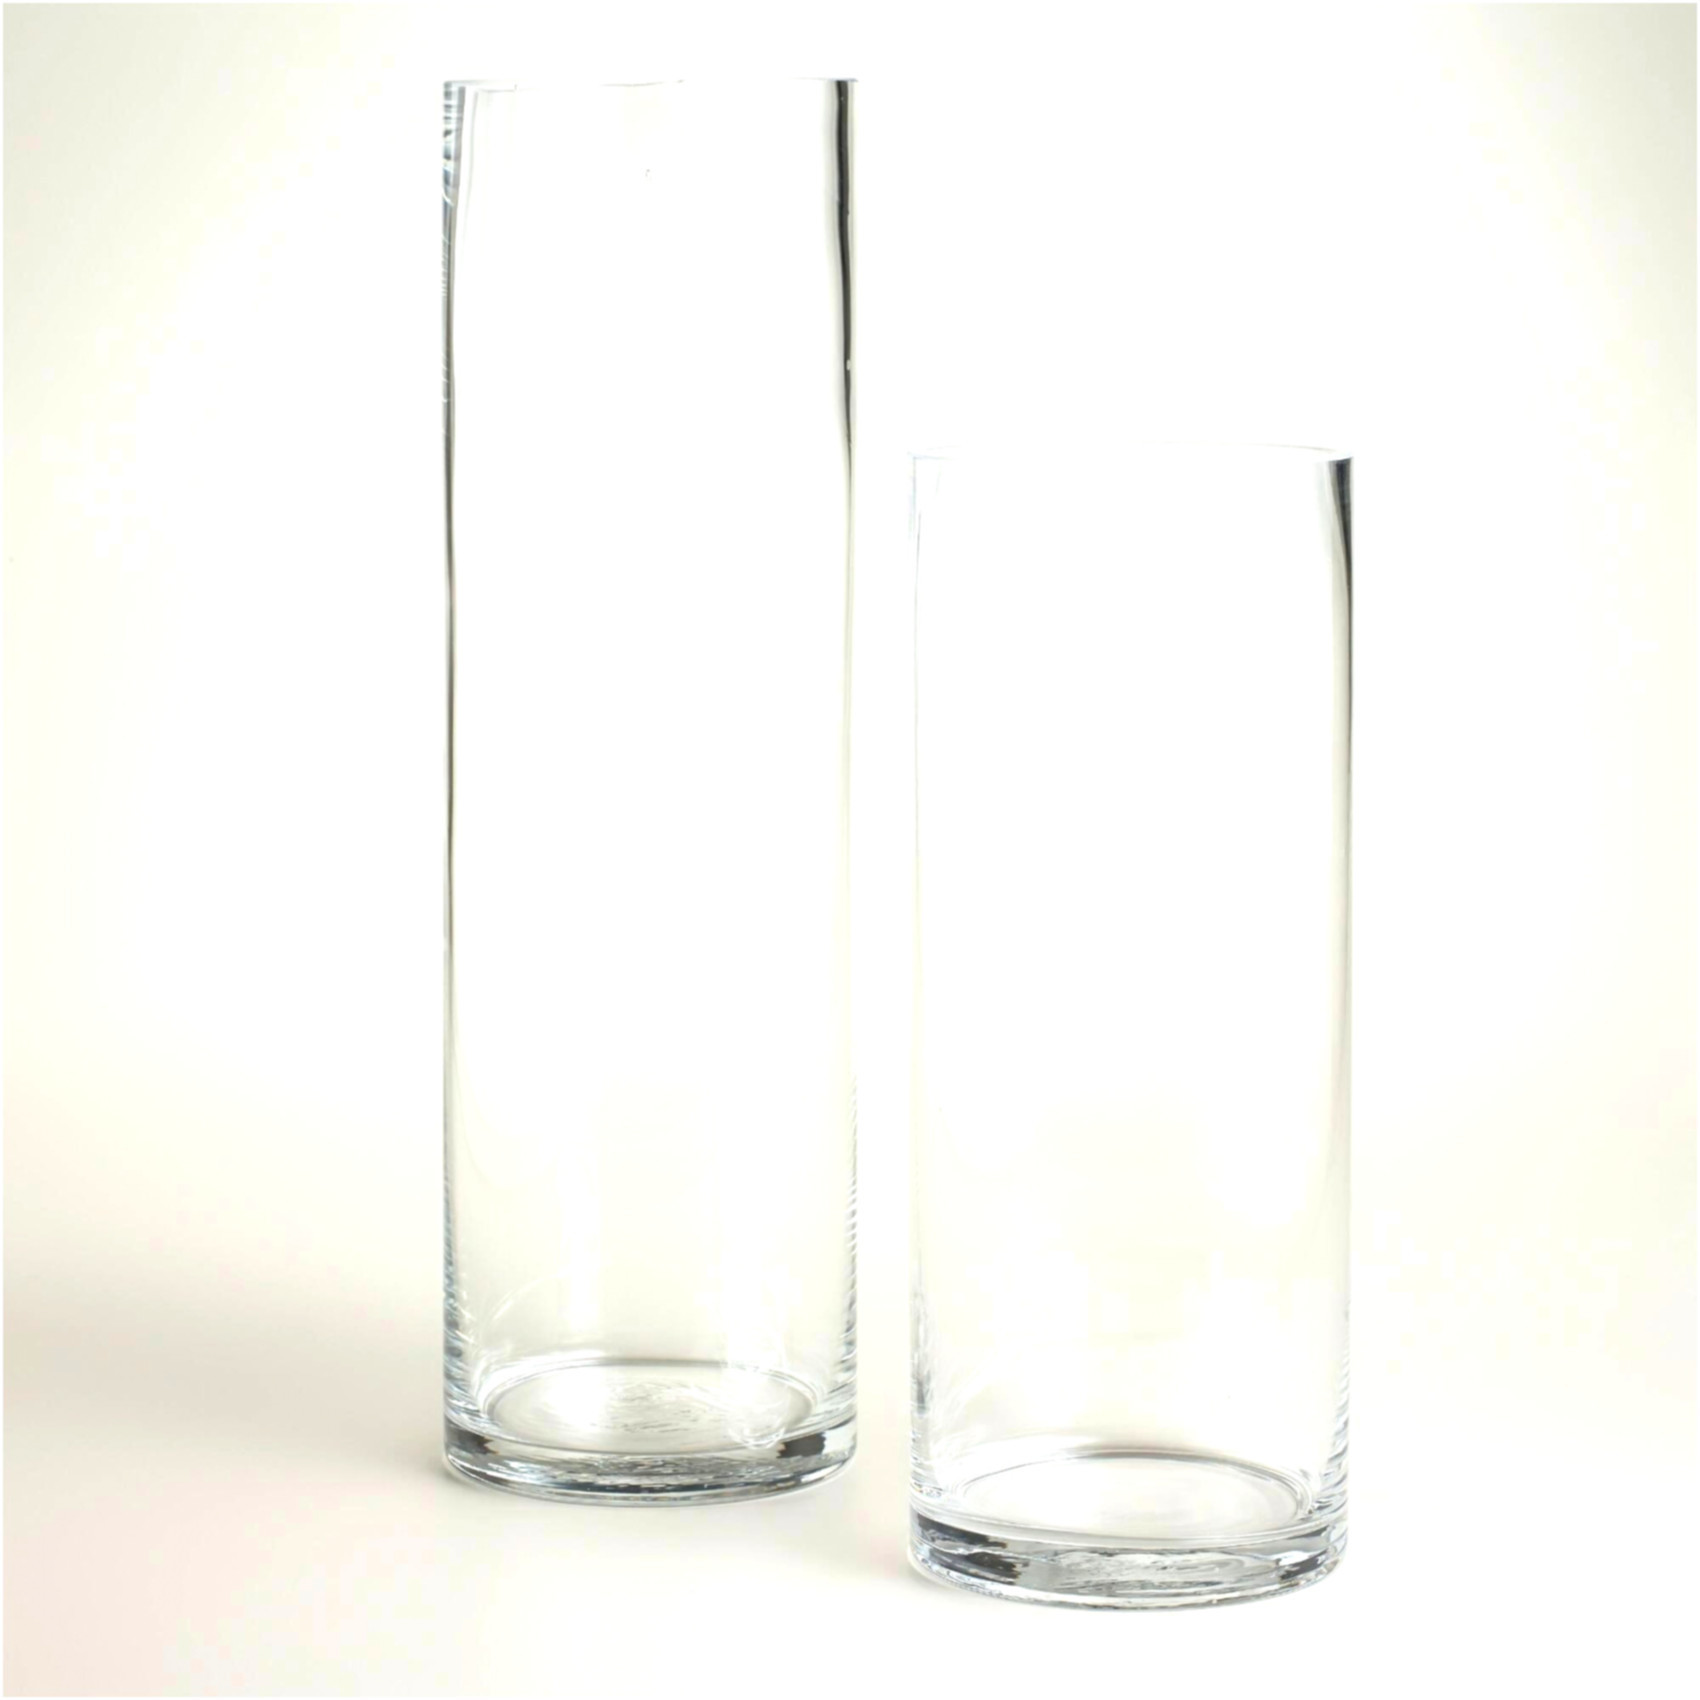 10 Perfect Square Glass Bud Vase 2024 free download square glass bud vase of why you should not go to glass vases wholesale glass vases pertaining to crystal glass vases wholesale inspirational 30 elegant vases with